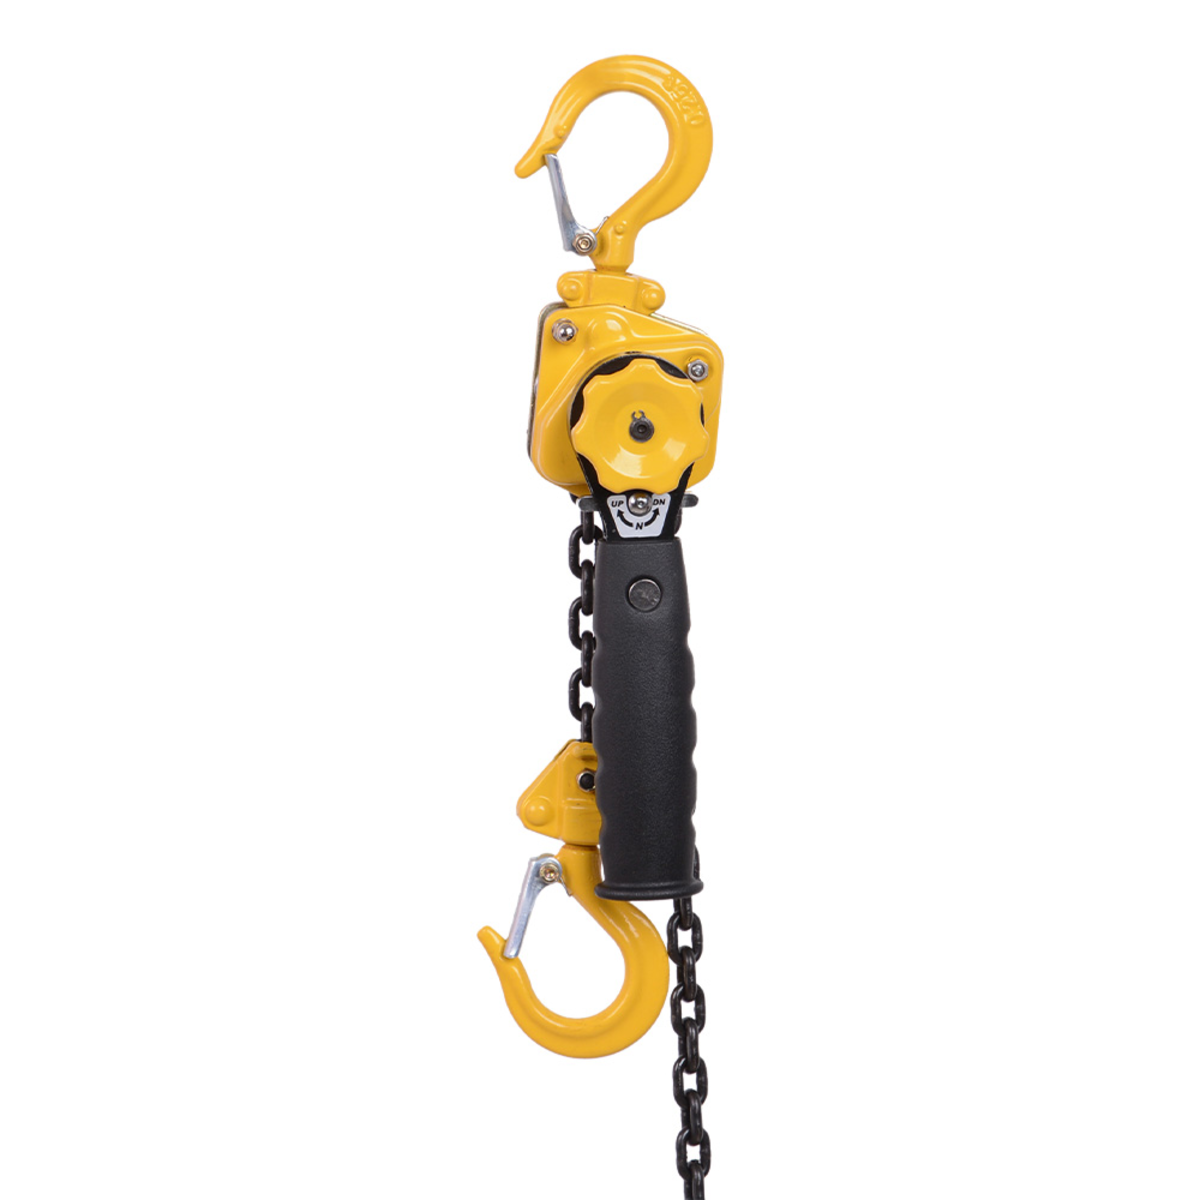 1 Ton Chain Hoist with 10 ft. Chain Fall and overload protection